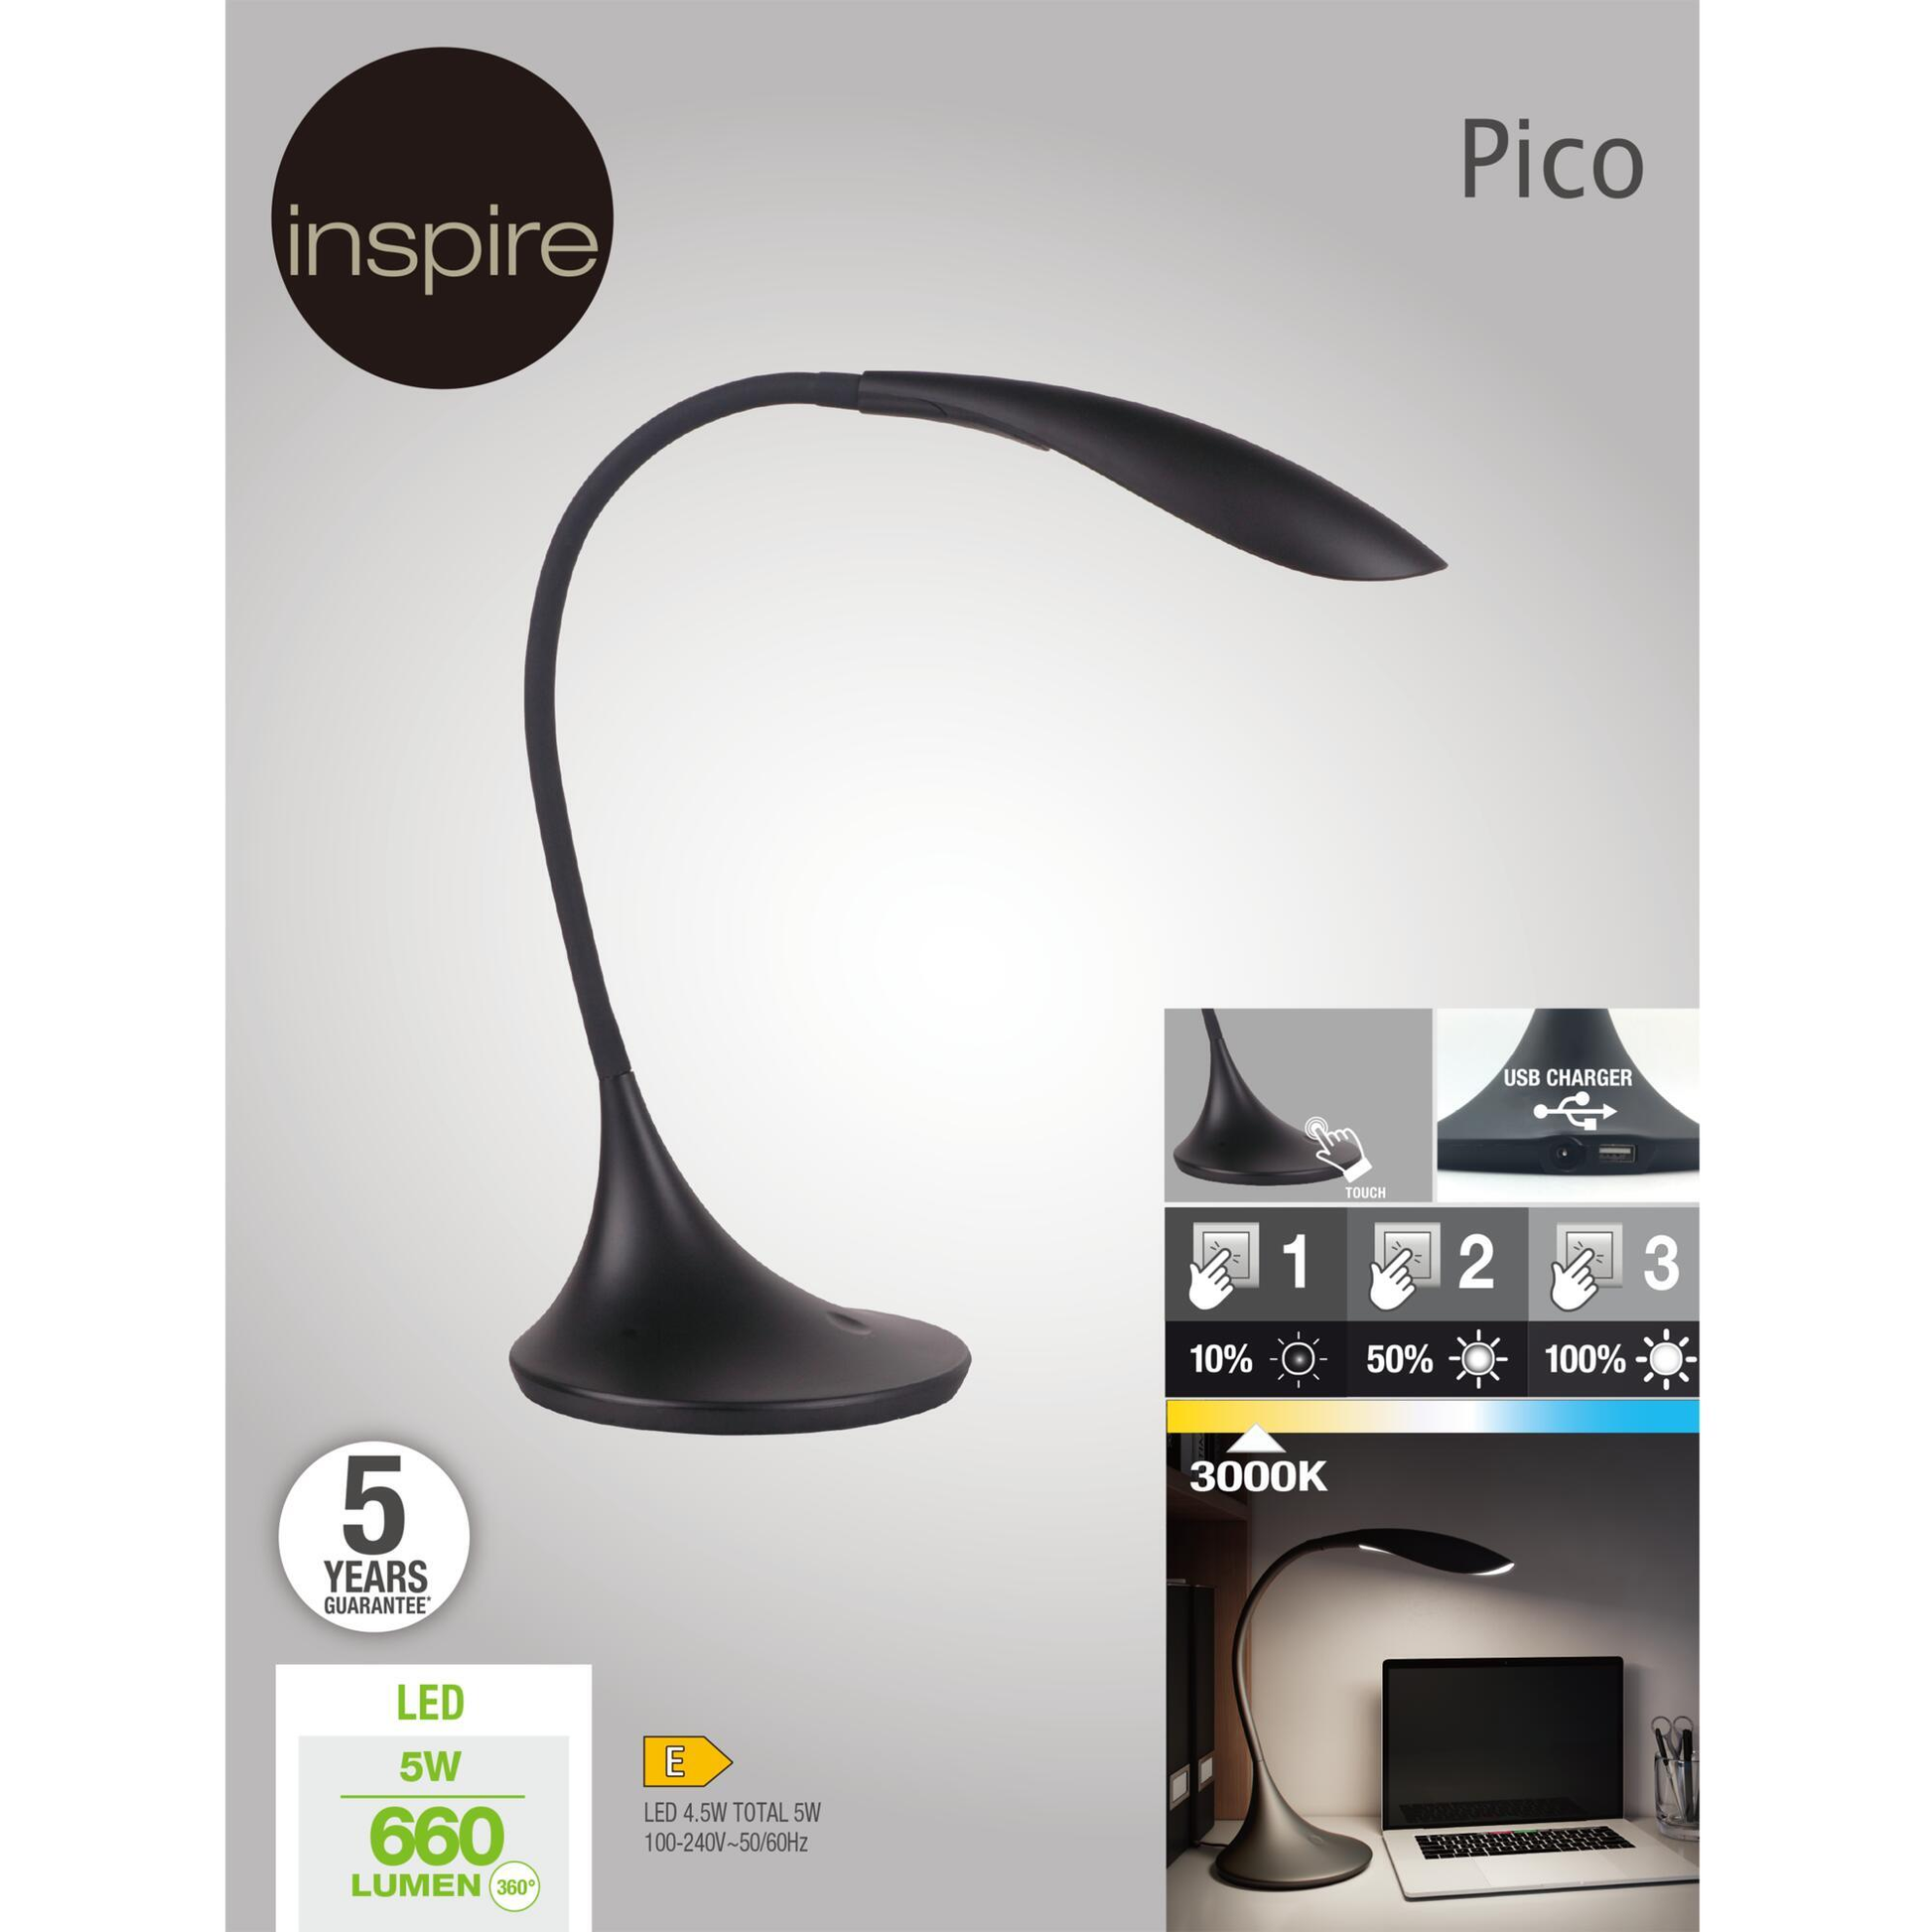 STUDIO LAMP PICO METAL BLACK H25 LED 4,5W WARM LIGHT TOUCH DIMMABLE WITH USB